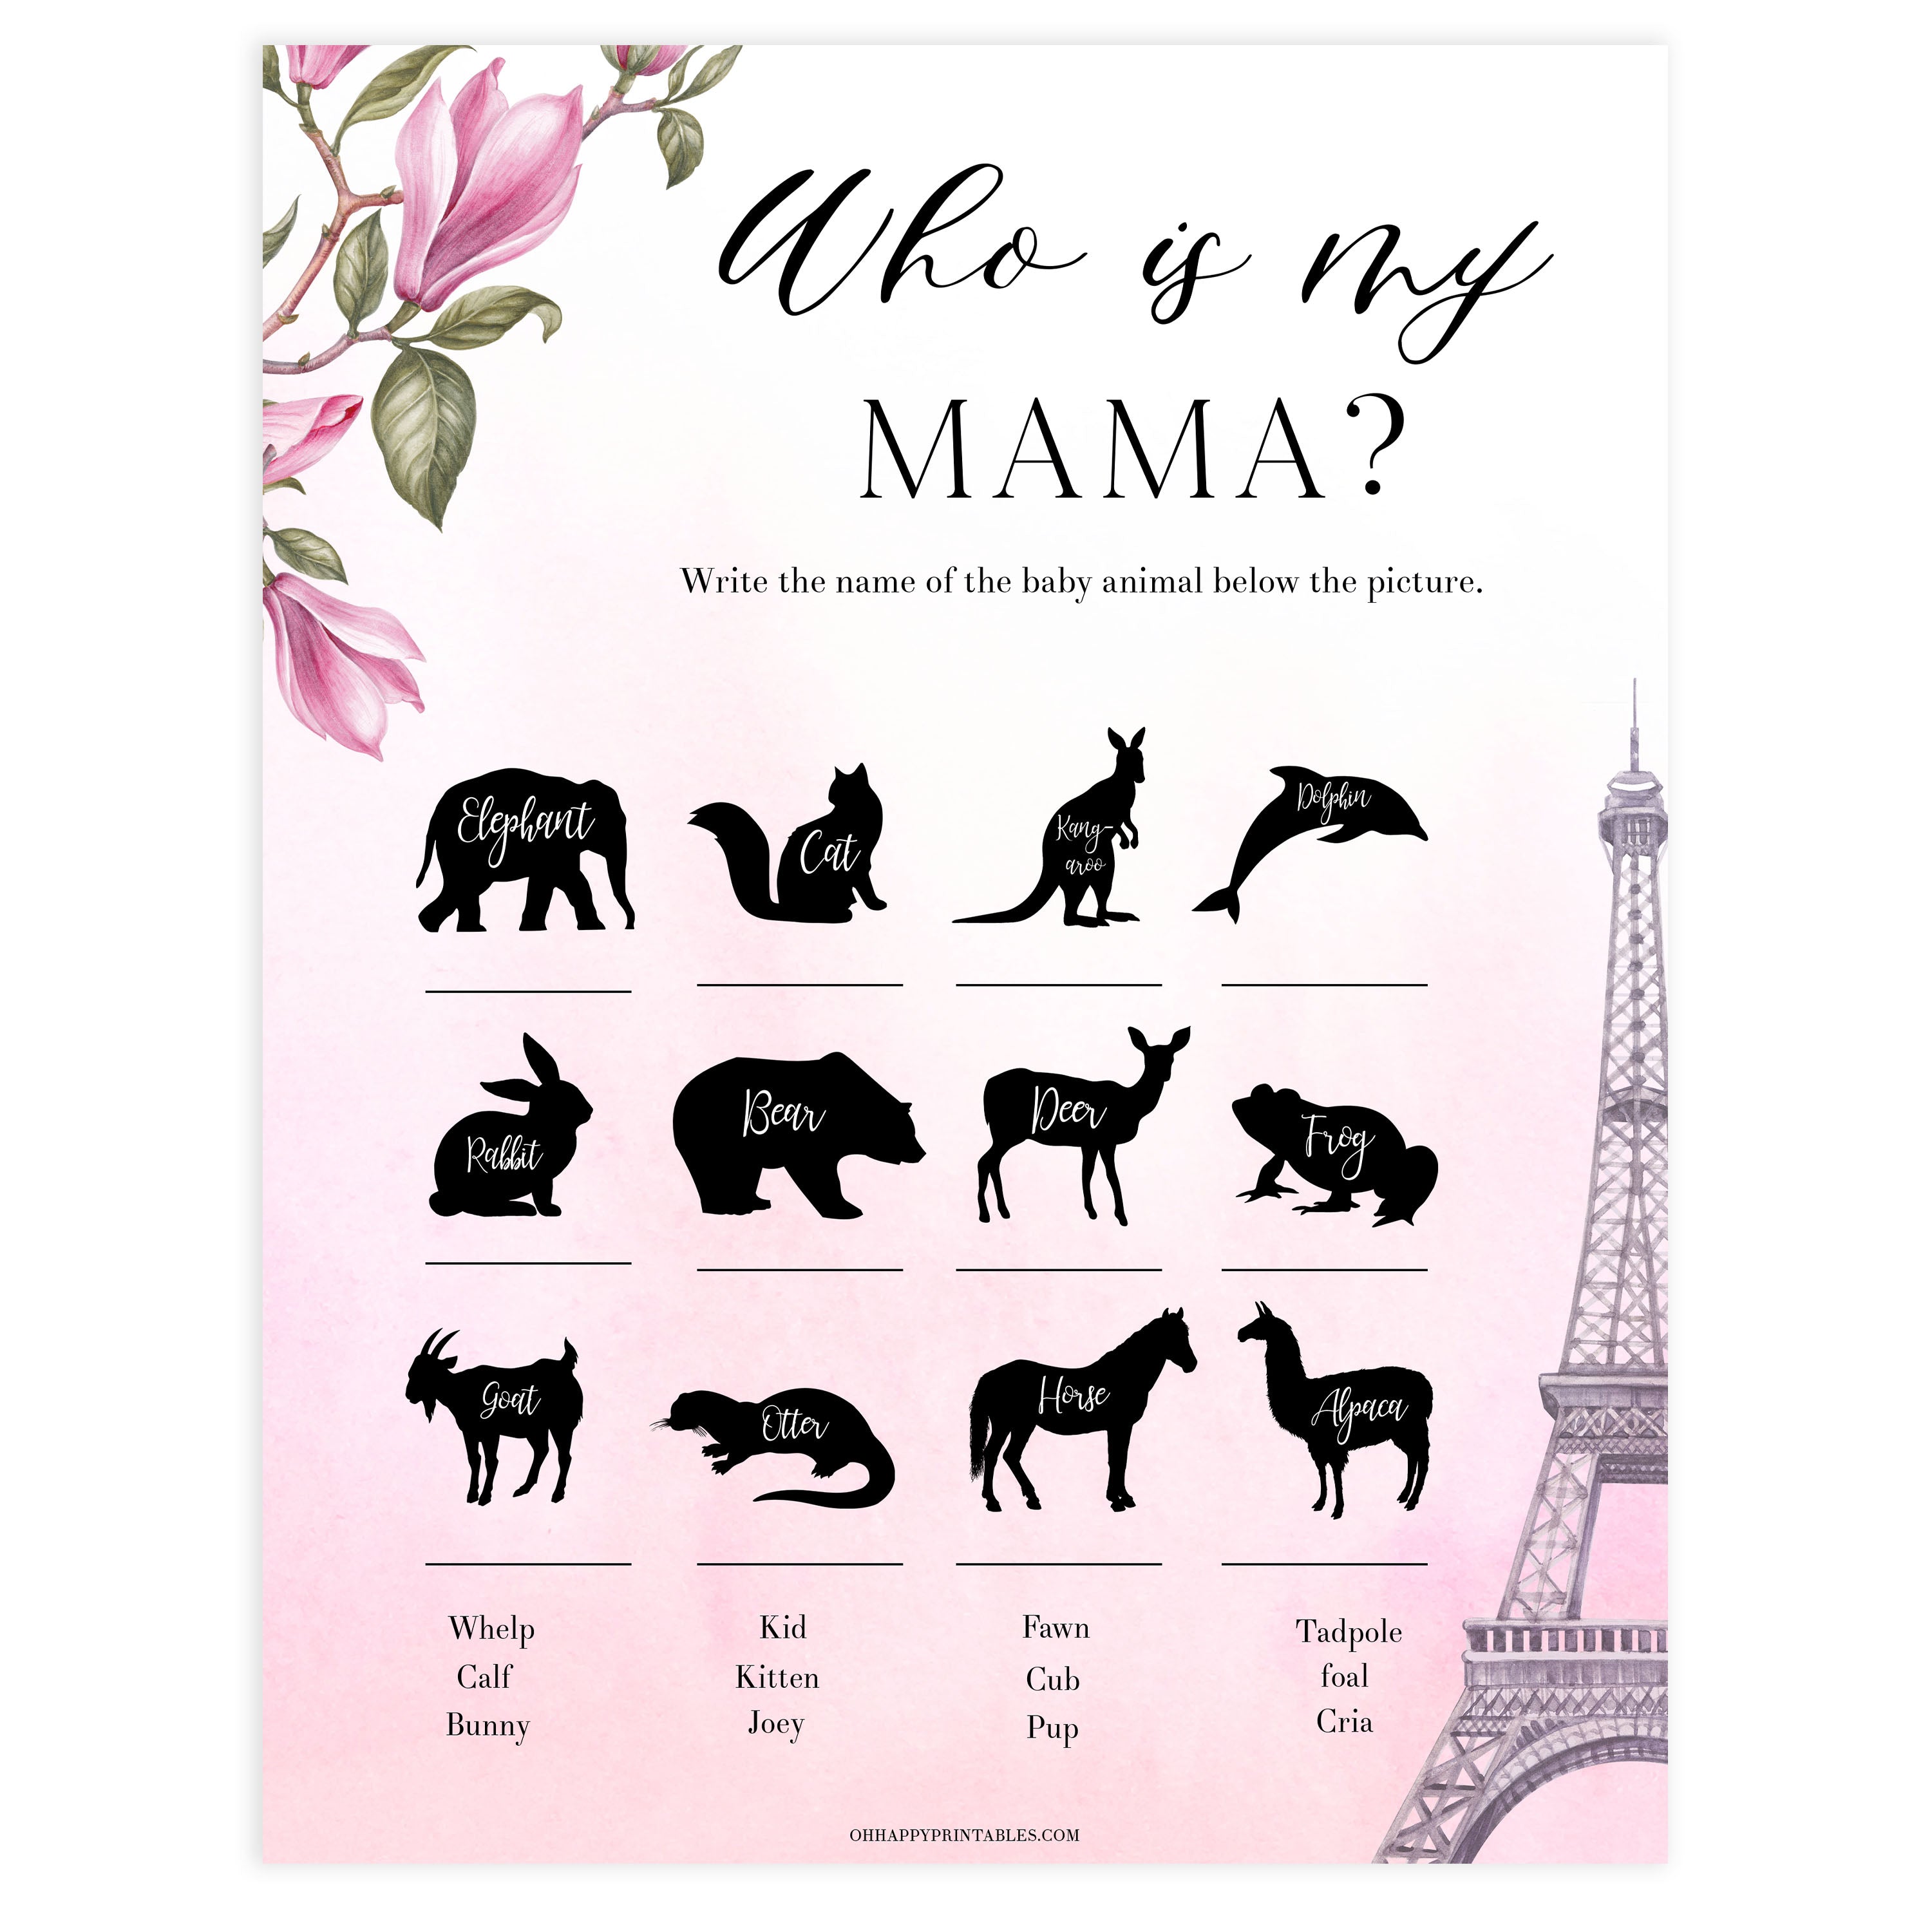 who is my mama baby game, Paris baby shower games, printable baby shower games, Parisian baby shower games, fun baby shower games